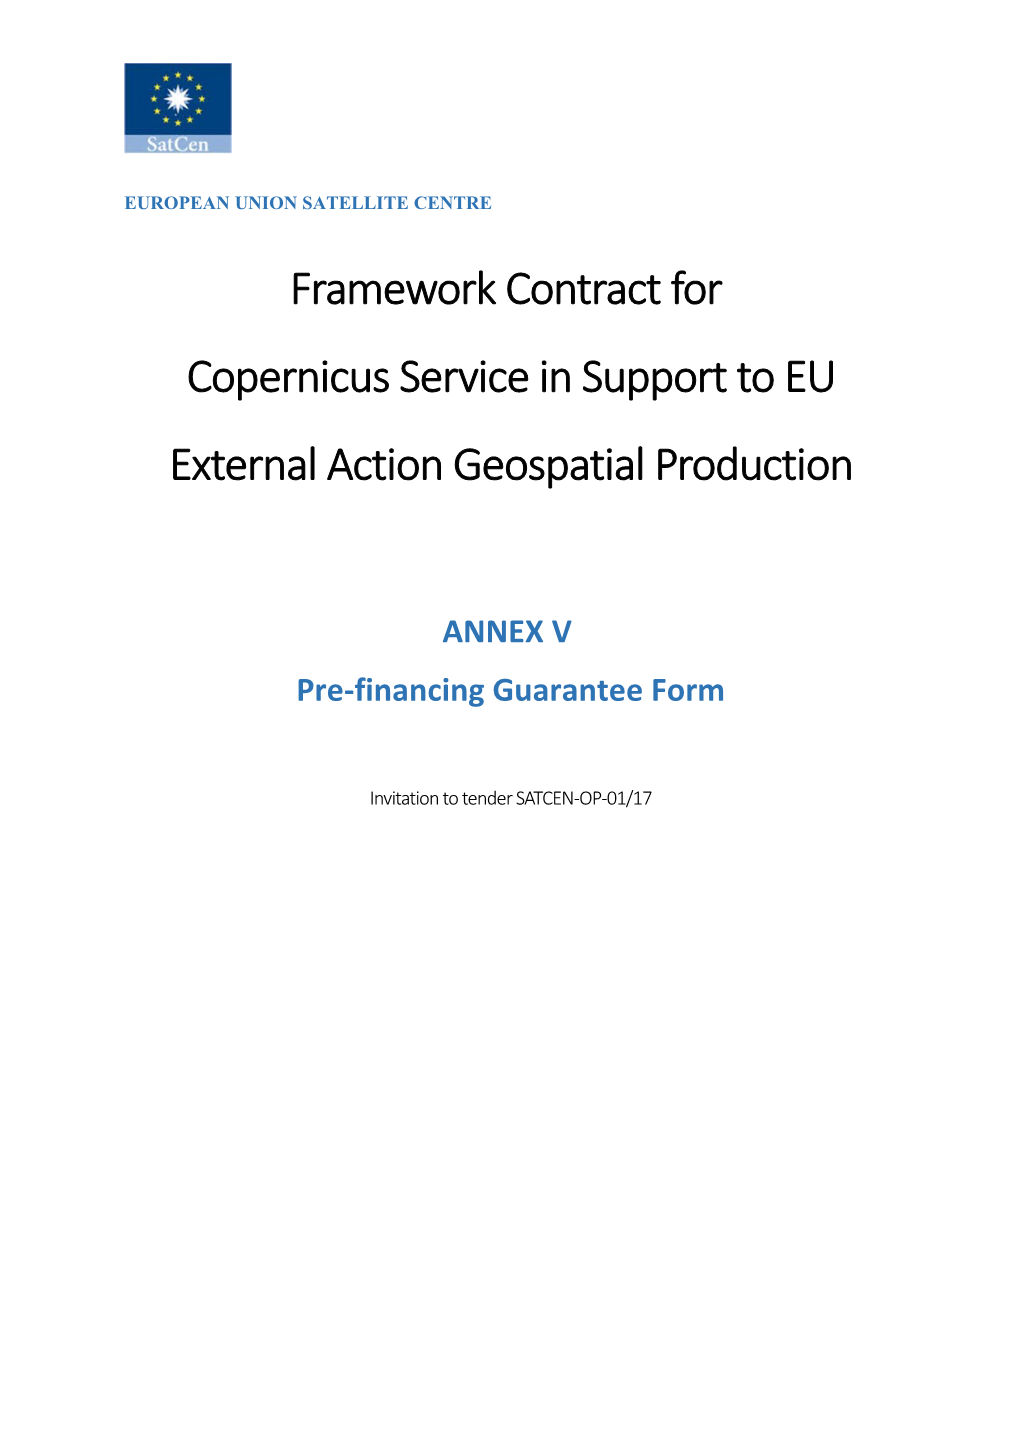 Copernicus Service in Support to EU External Action Geospatial Production